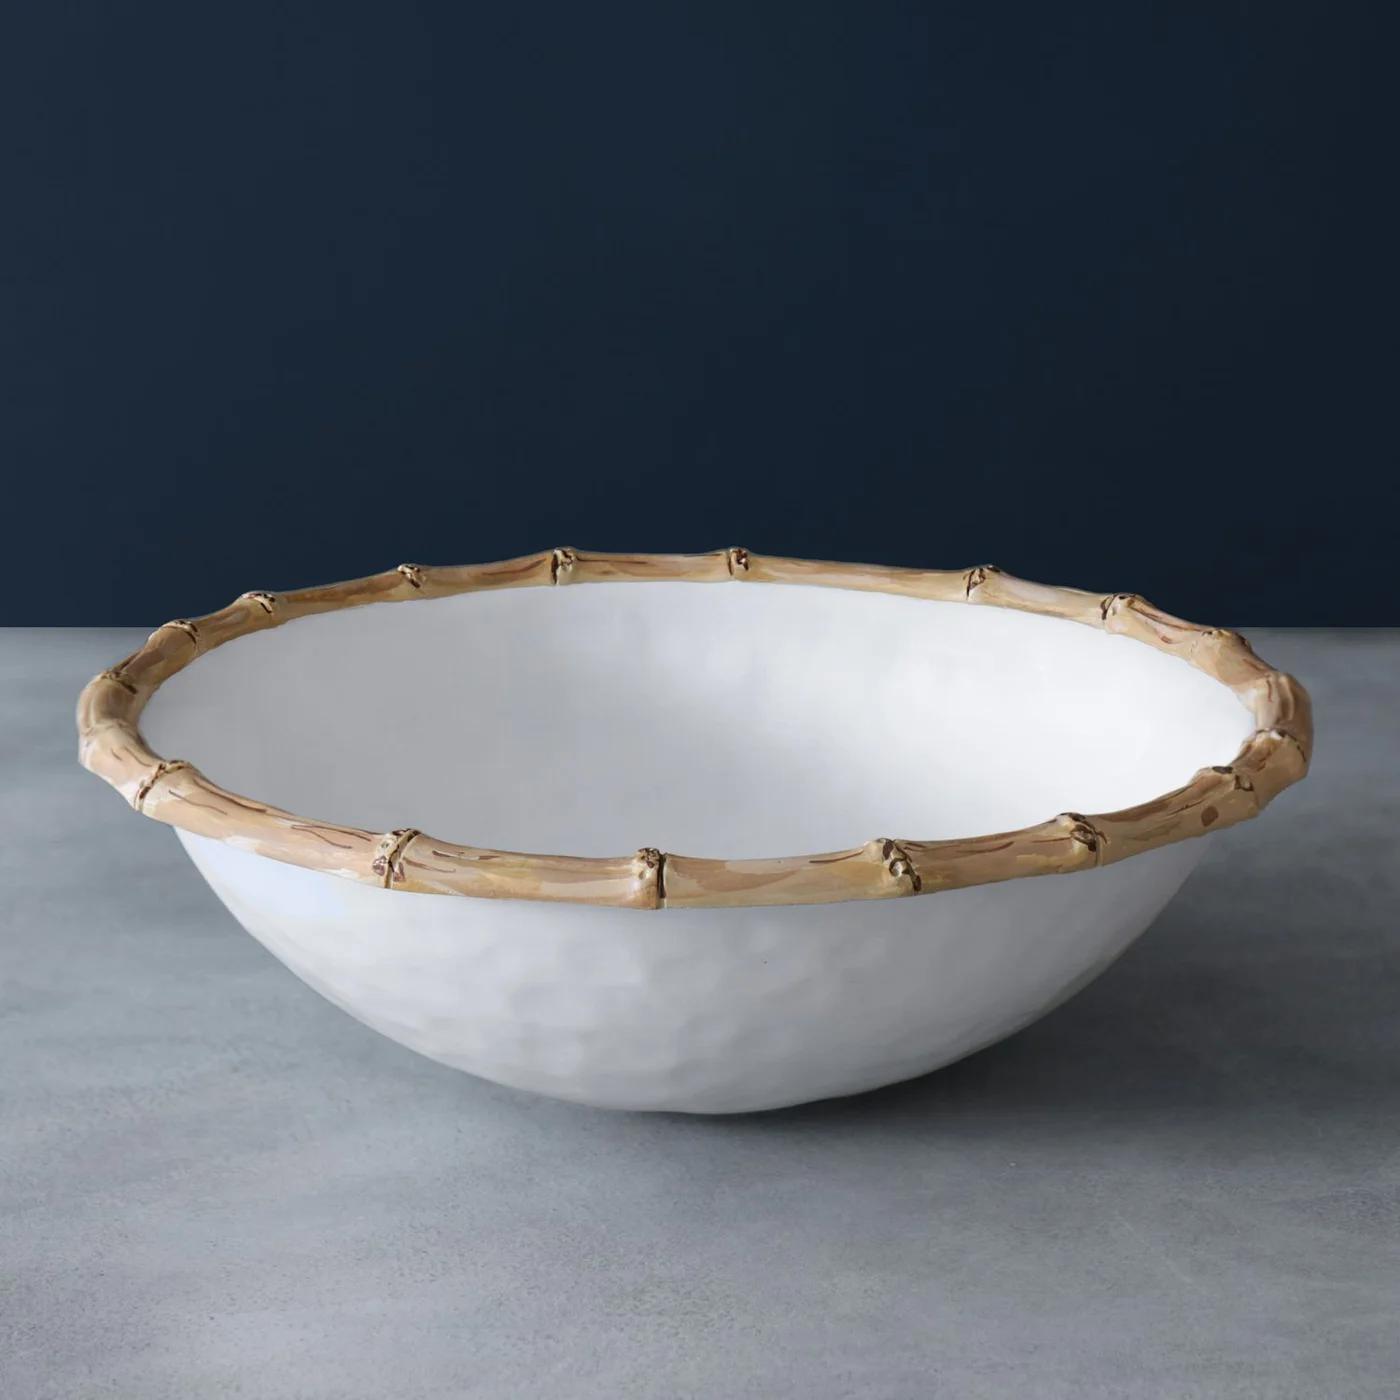 Beatriz Ball Vida Bamboo Salad Bowl-Home/Giftware-WHITE AND NATURAL-L-Kevin's Fine Outdoor Gear & Apparel